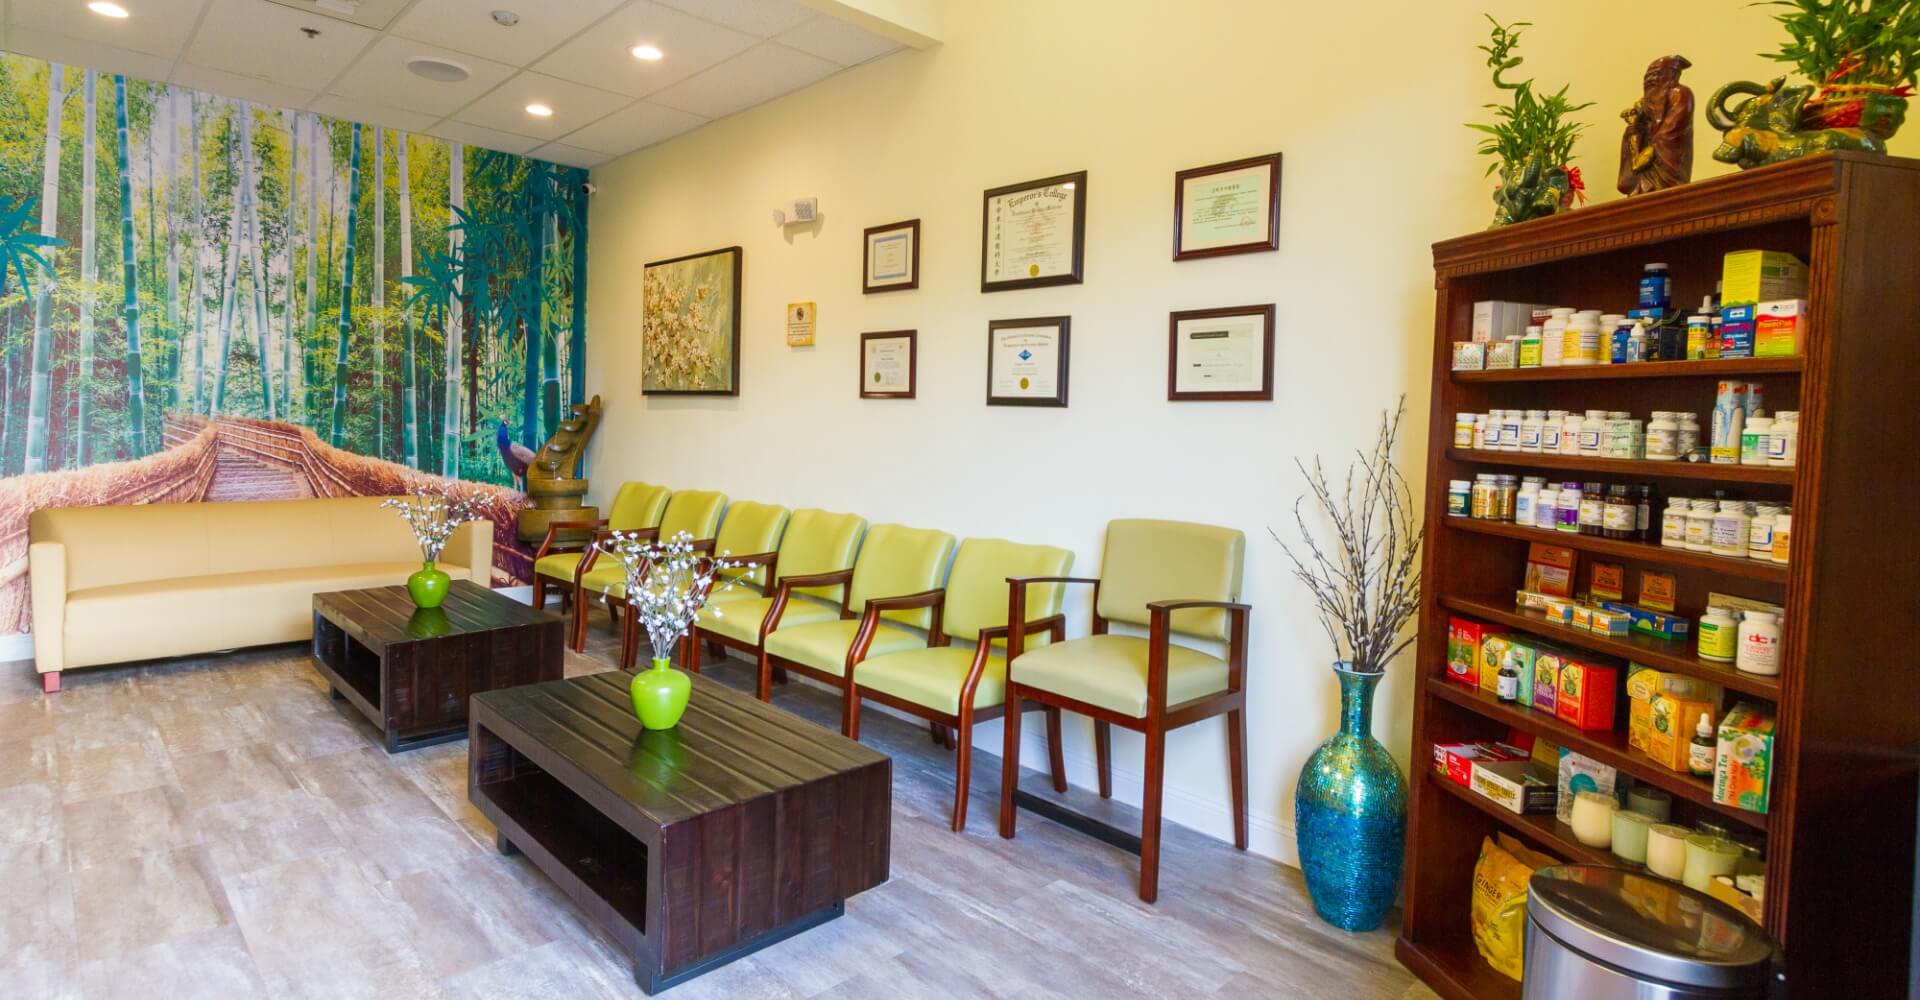 Acupuncture & Herbs Services Inc. In Bakersfield, Kings County